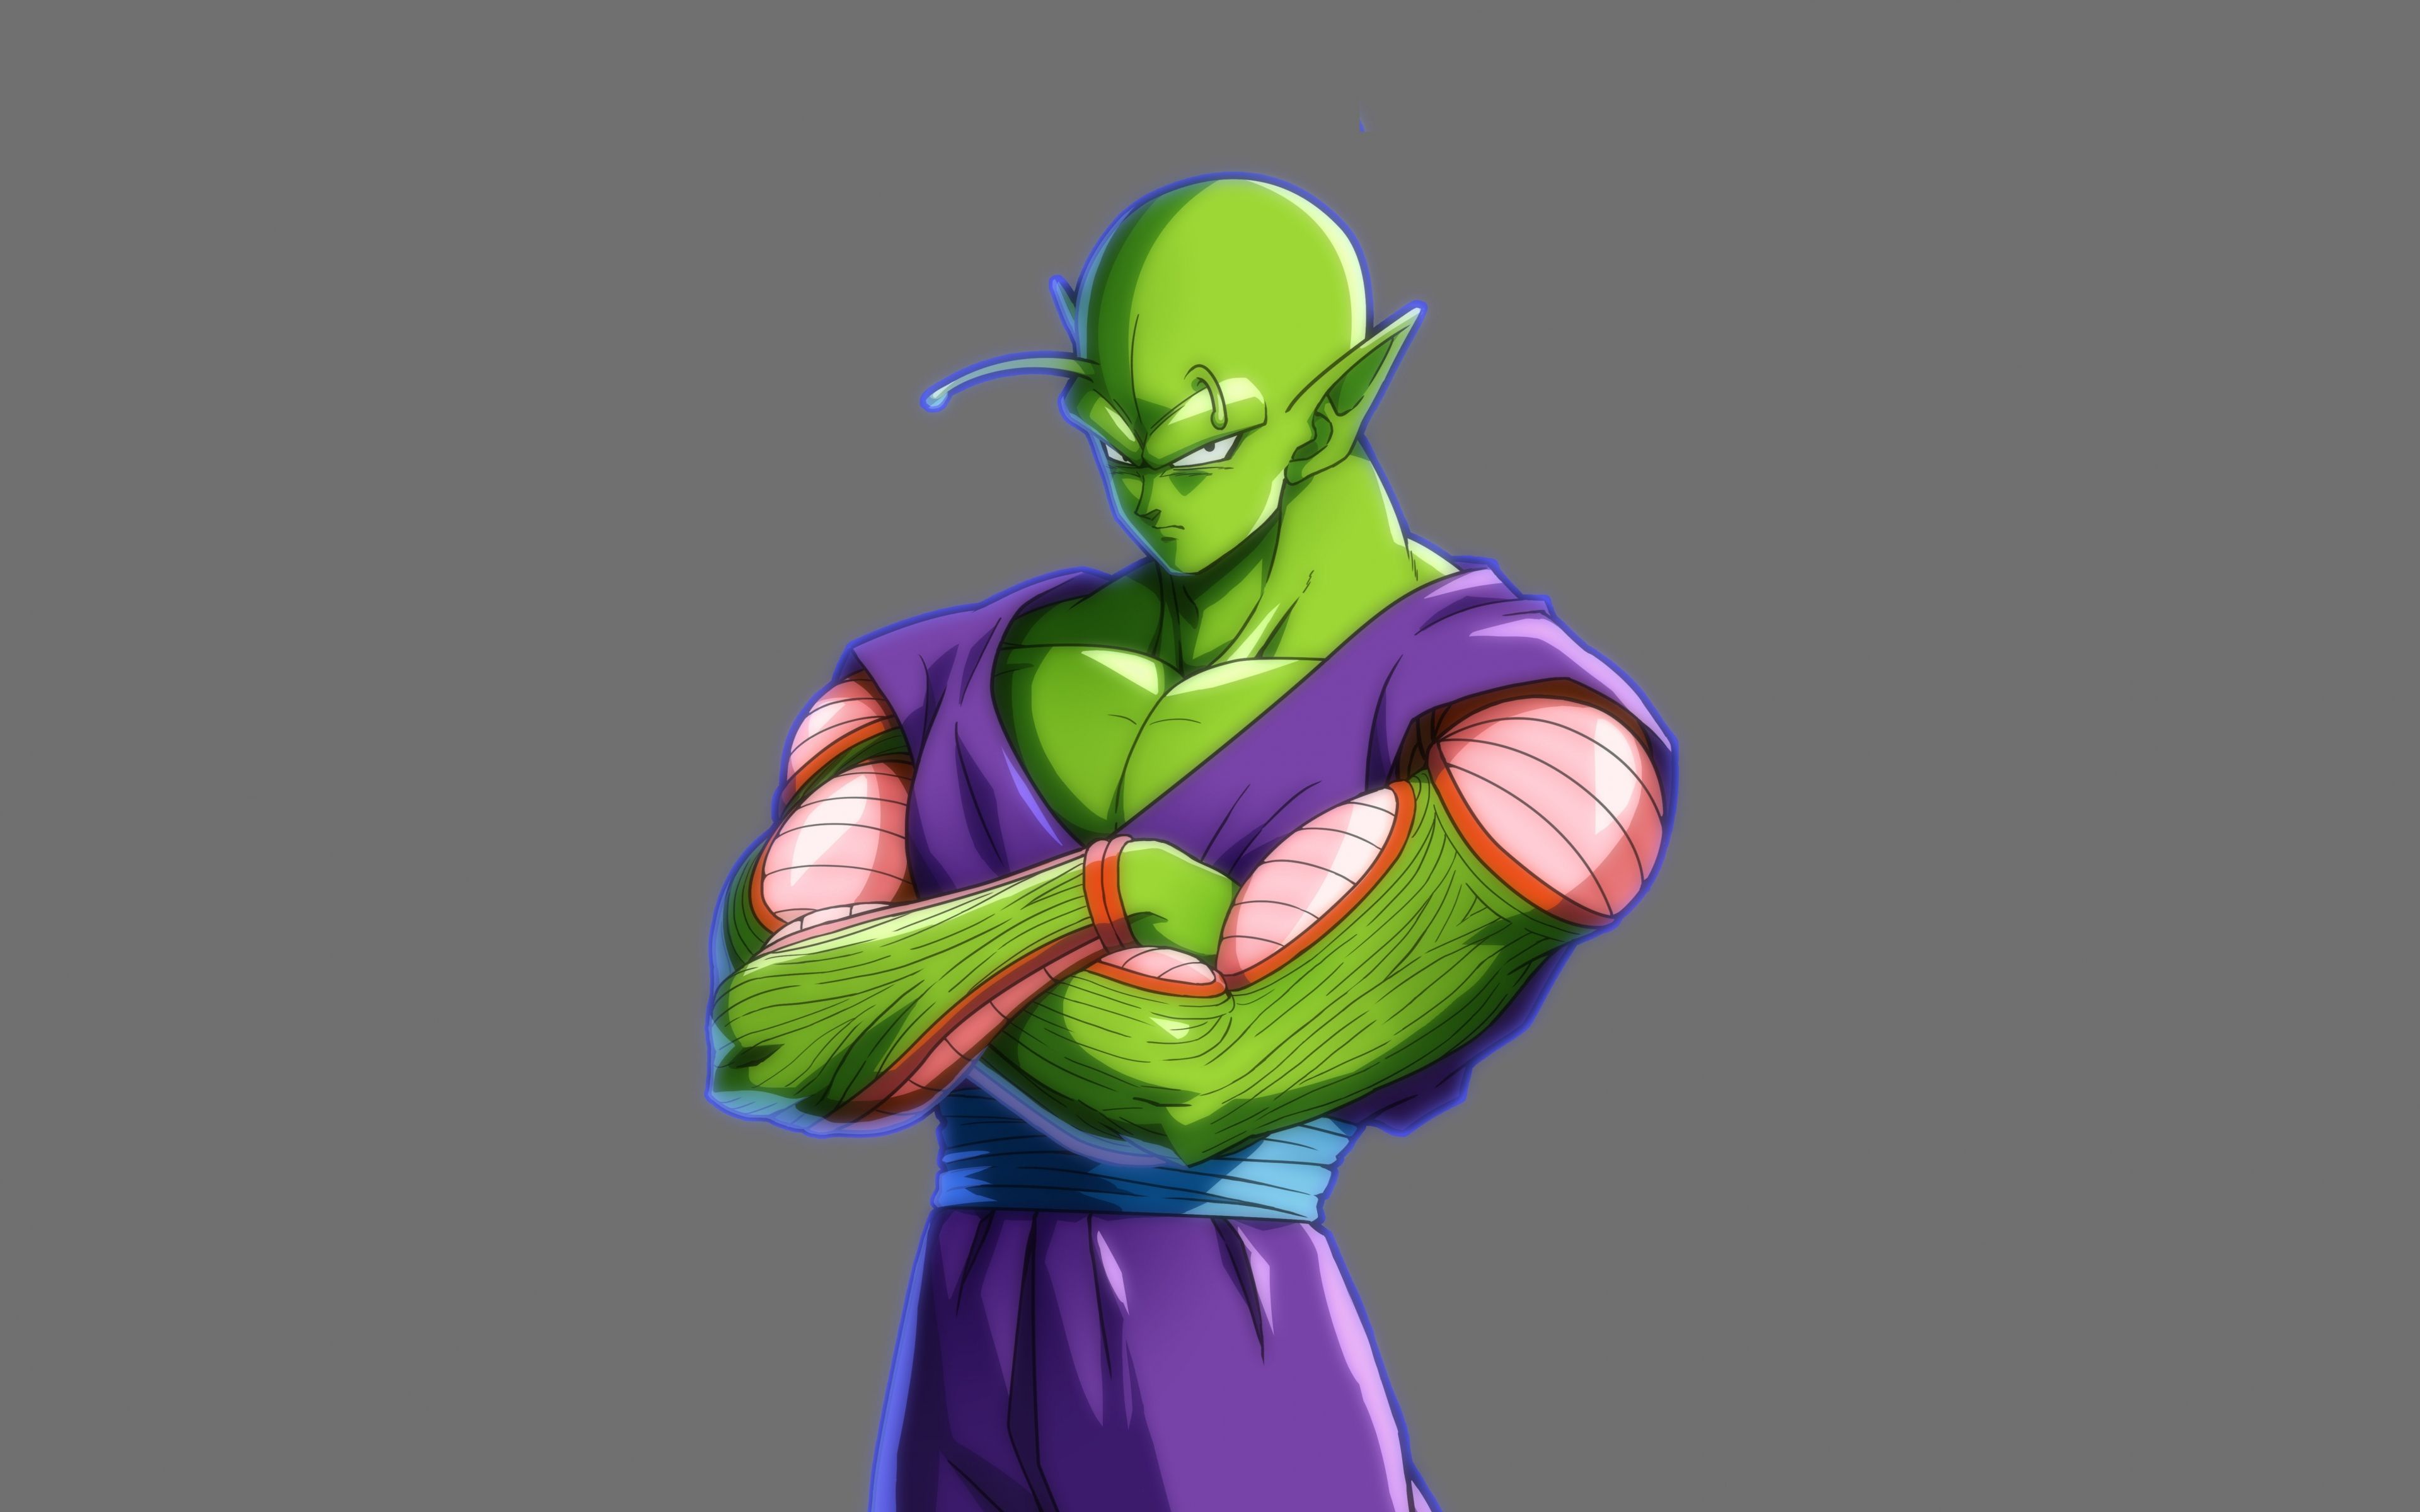 Download 3840x2400 wallpaper piccolo, dragon ball fighterz, video game, anime, 4k, ultra HD 16: widescreen, 3840x2400 HD image, background, 6249